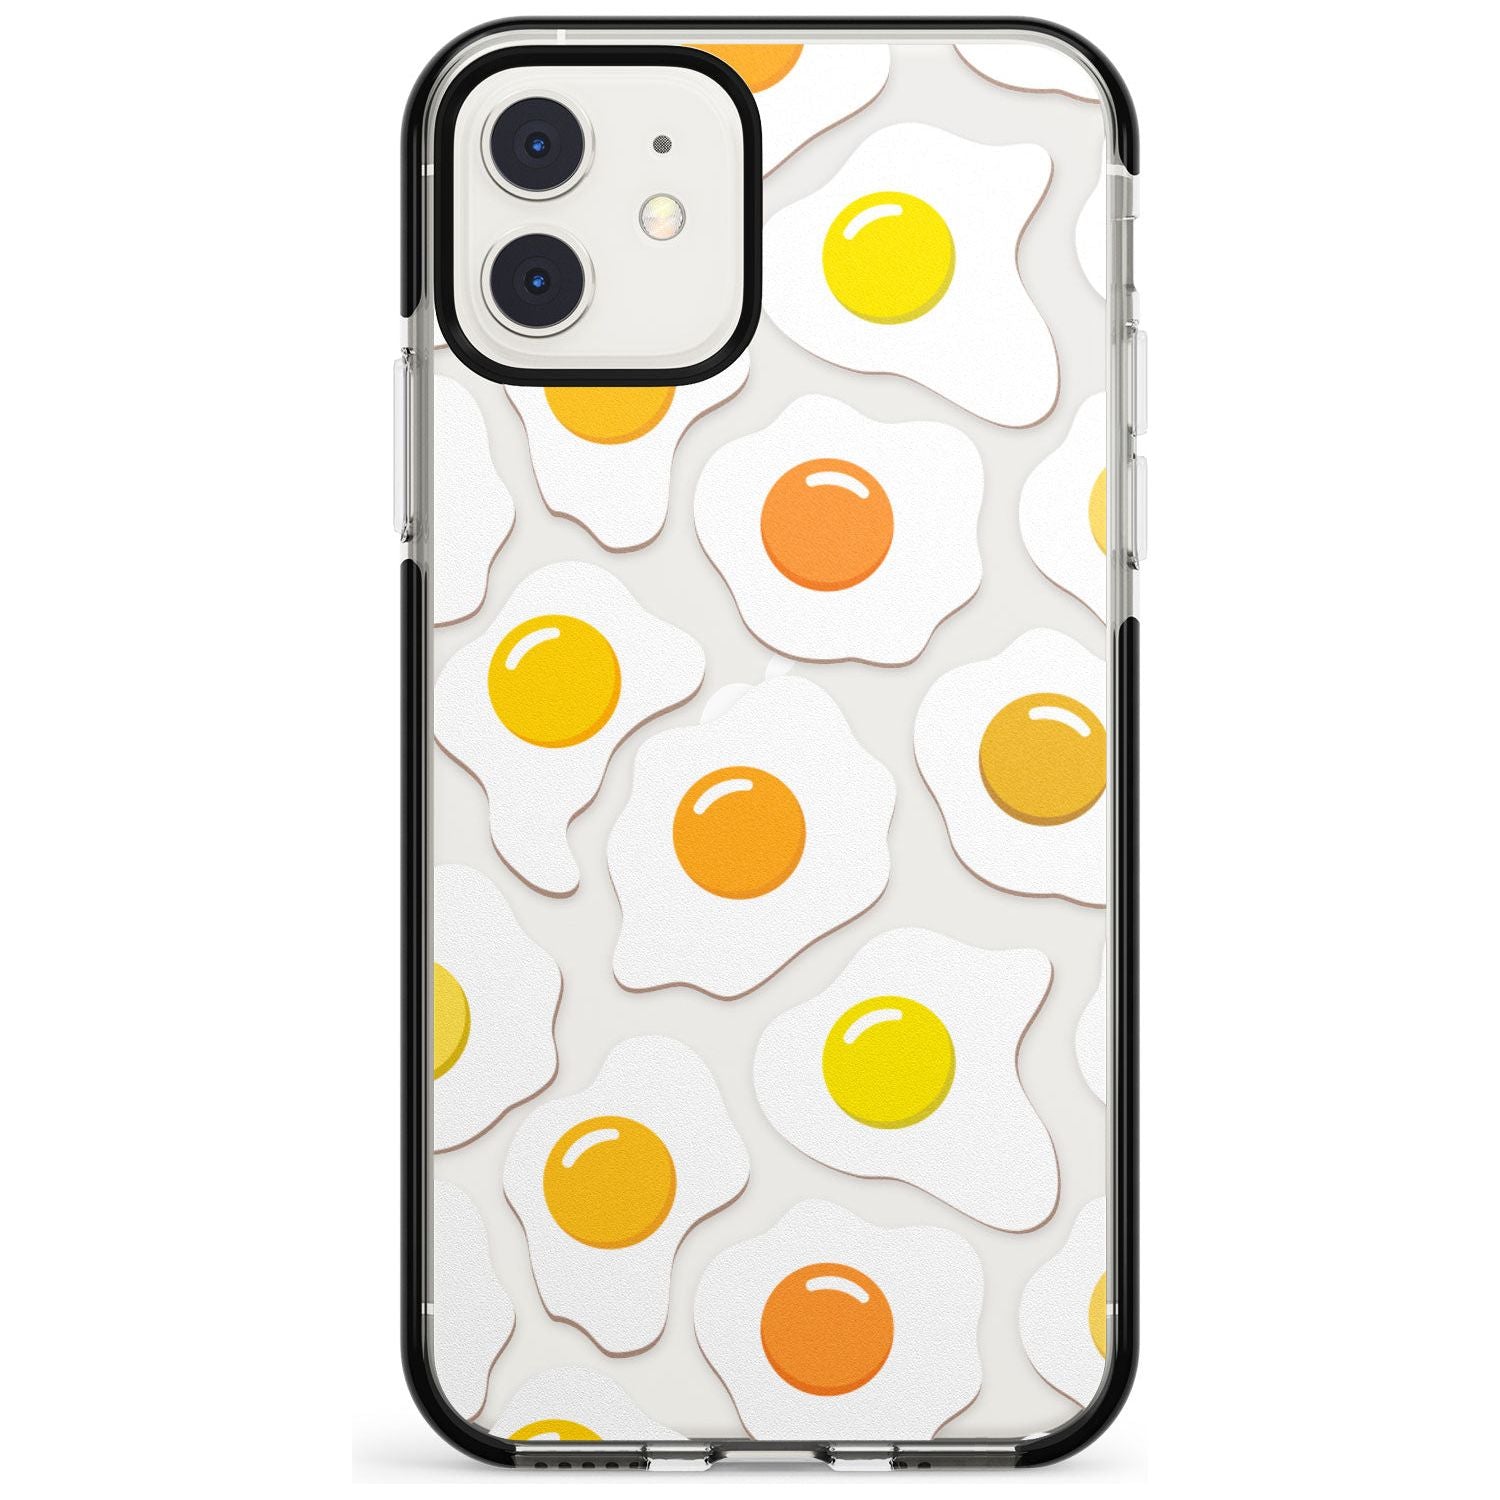 Fried Egg Pattern Black Impact Phone Case for iPhone 11 Pro Max